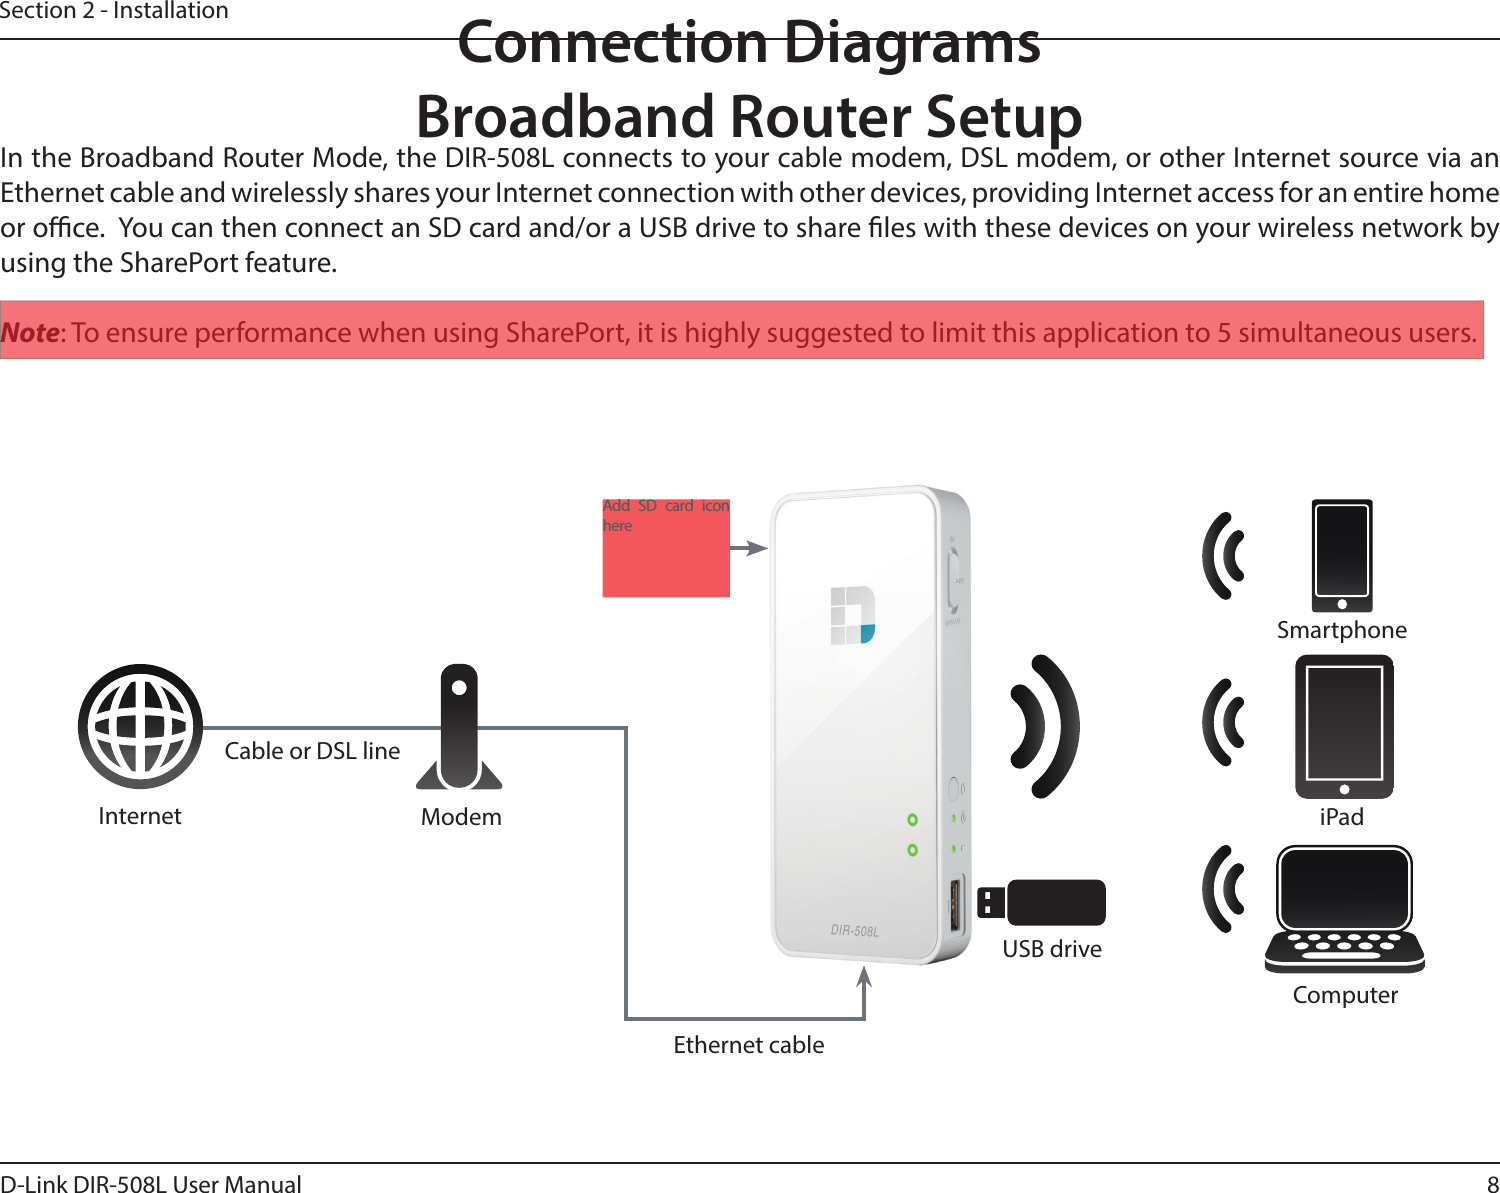 8D-Link DIR-508L User ManualSection 2 - Installation Connection DiagramsBroadband Router SetupIn the Broadband Router Mode, the DIR-508L connects to your cable modem, DSL modem, or other Internet source via an Ethernet cable and wirelessly shares your Internet connection with other devices, providing Internet access for an entire home or oce.  You can then connect an SD card and/or a USB drive to share les with these devices on your wireless network by using the SharePort feature. Note: To ensure performance when using SharePort, it is highly suggested to limit this application to 5 simultaneous users.ComputeriPadSmartphoneInternet ModemEthernet cableCable or DSL lineUSB driveAdd SD card icon here